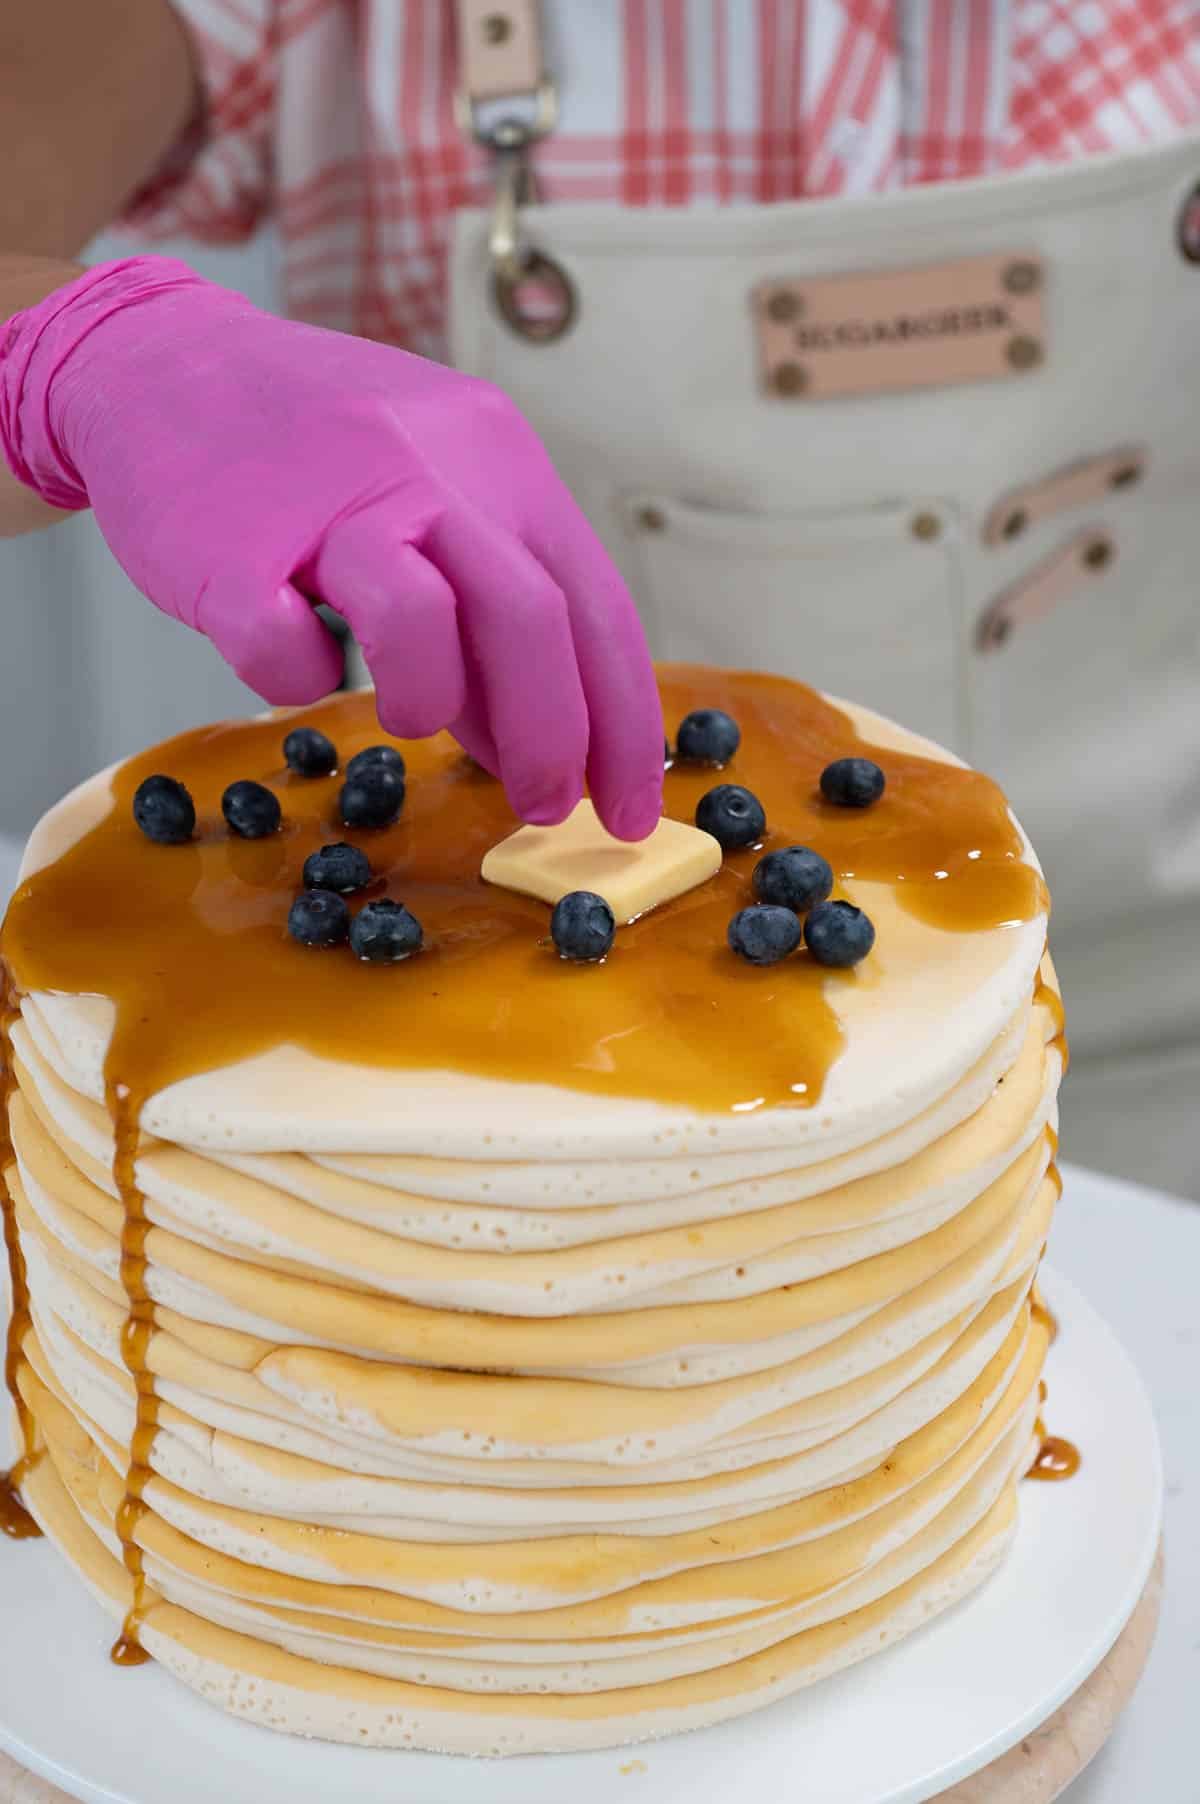 hand placing blueberries and fondant butter on top of a cake